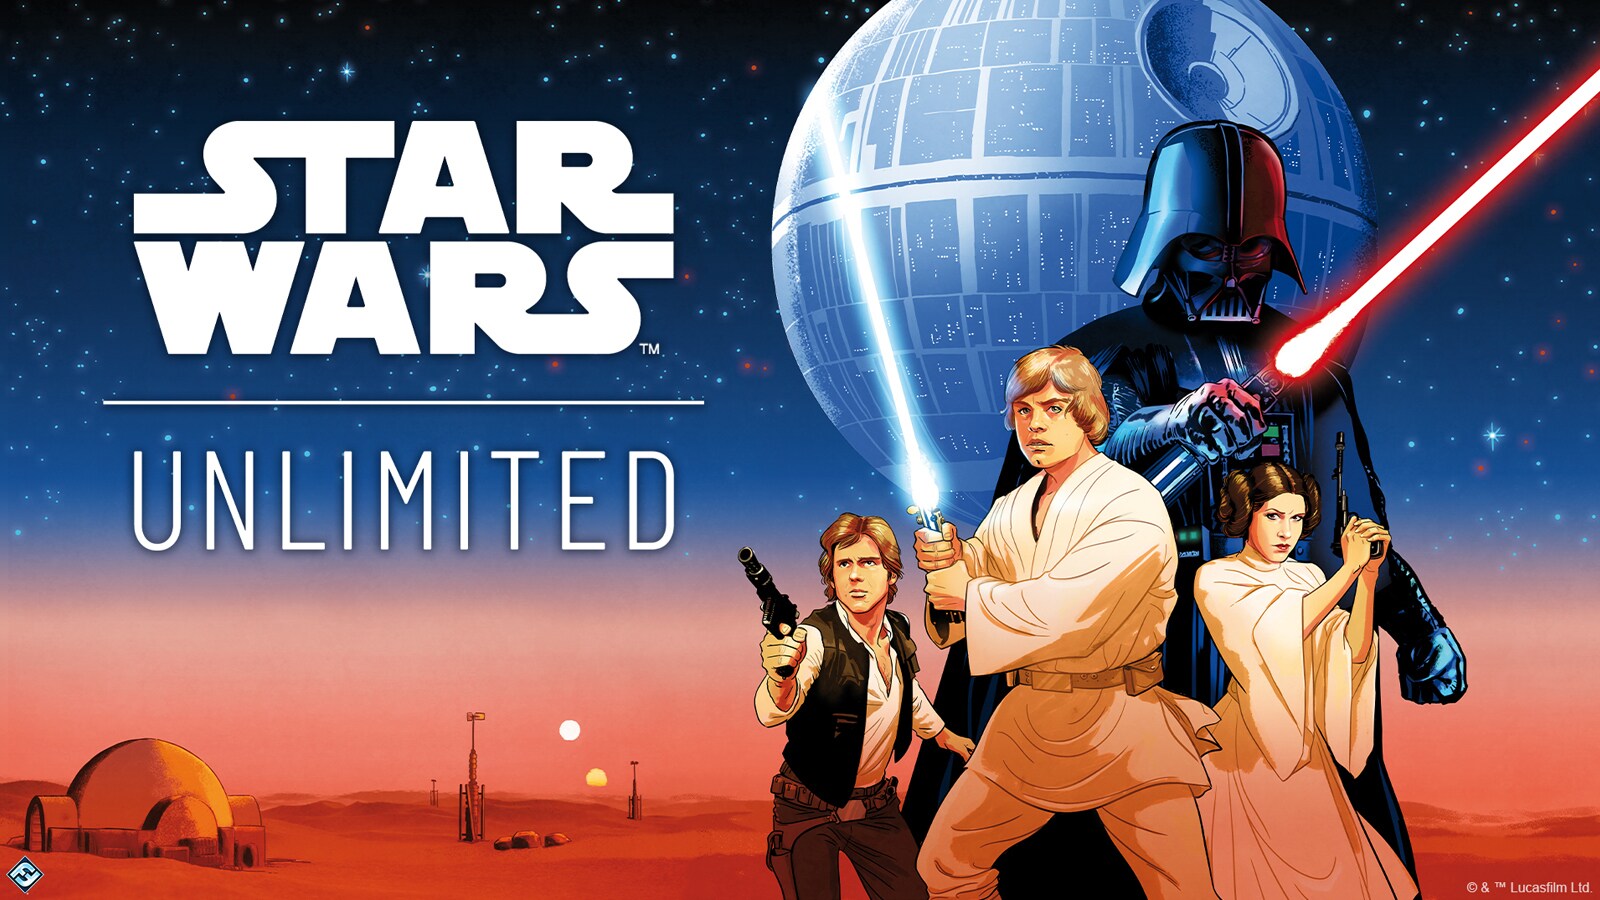 In Star Wars: Unlimited, You Can Fight the Empire or Crush the Rebellion